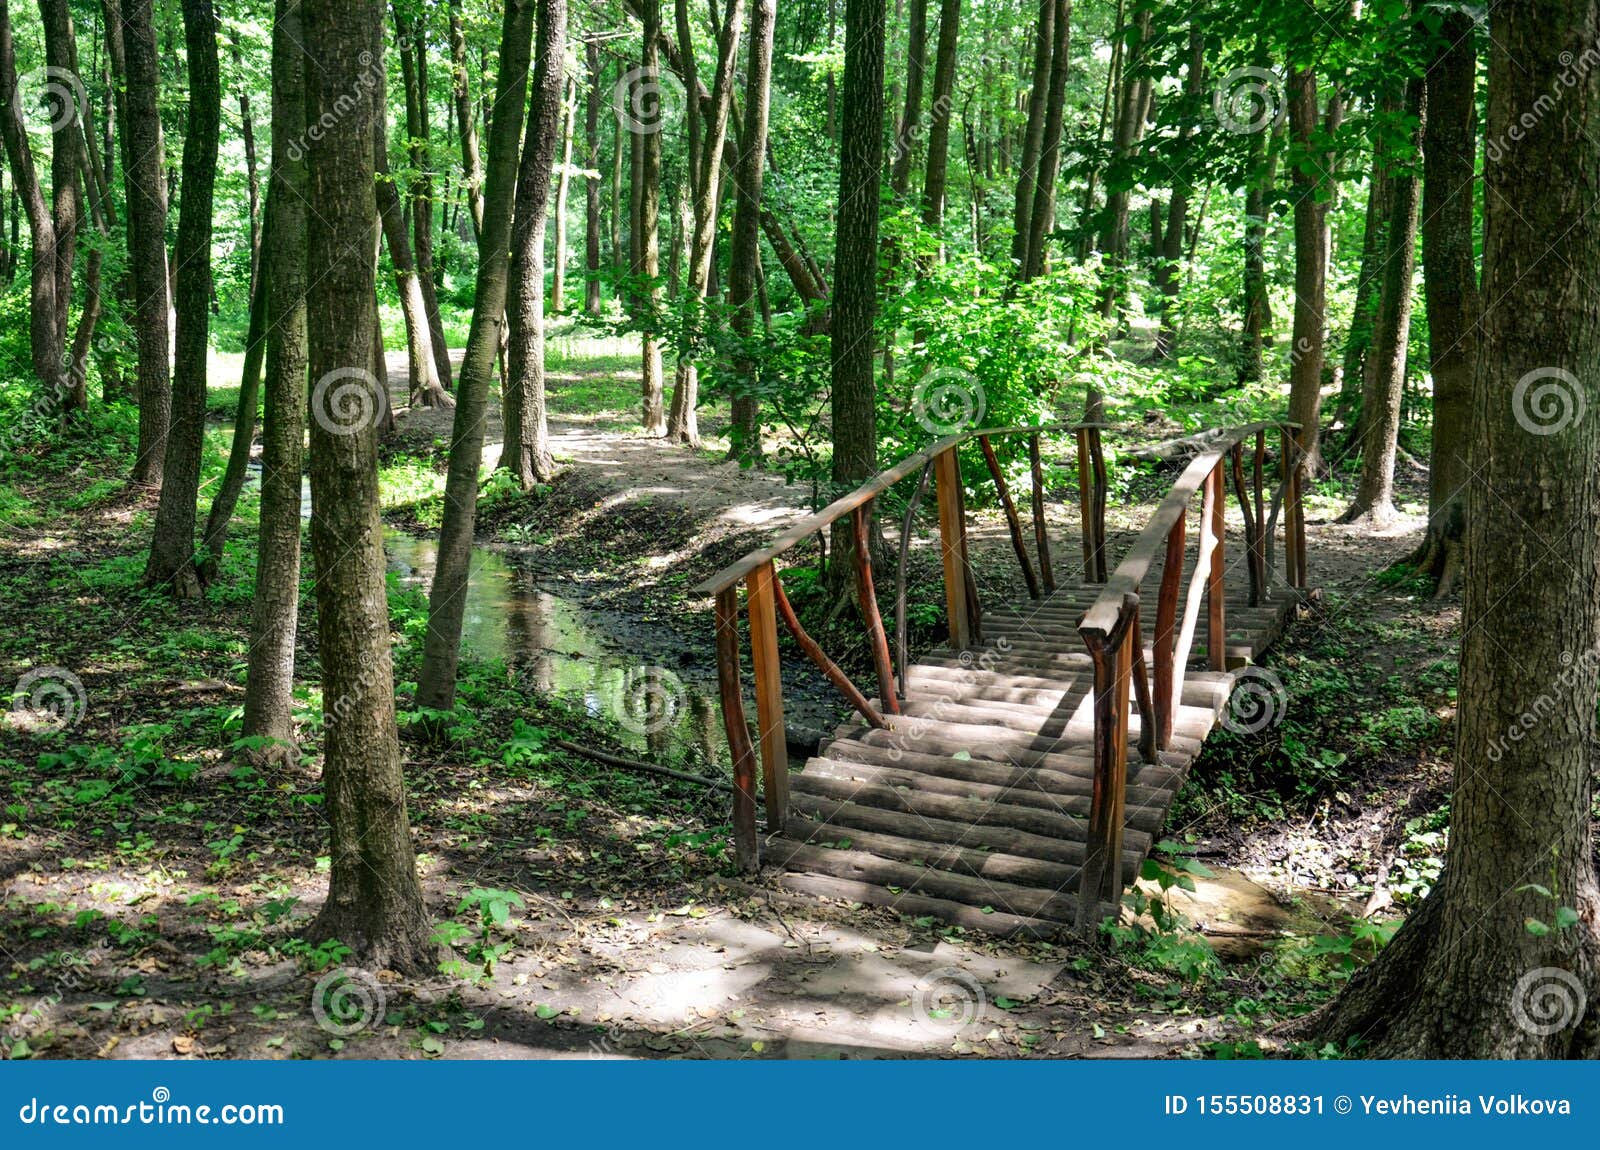 The Path Across The Bridge In The Green Forest Wooden Bridge Over The